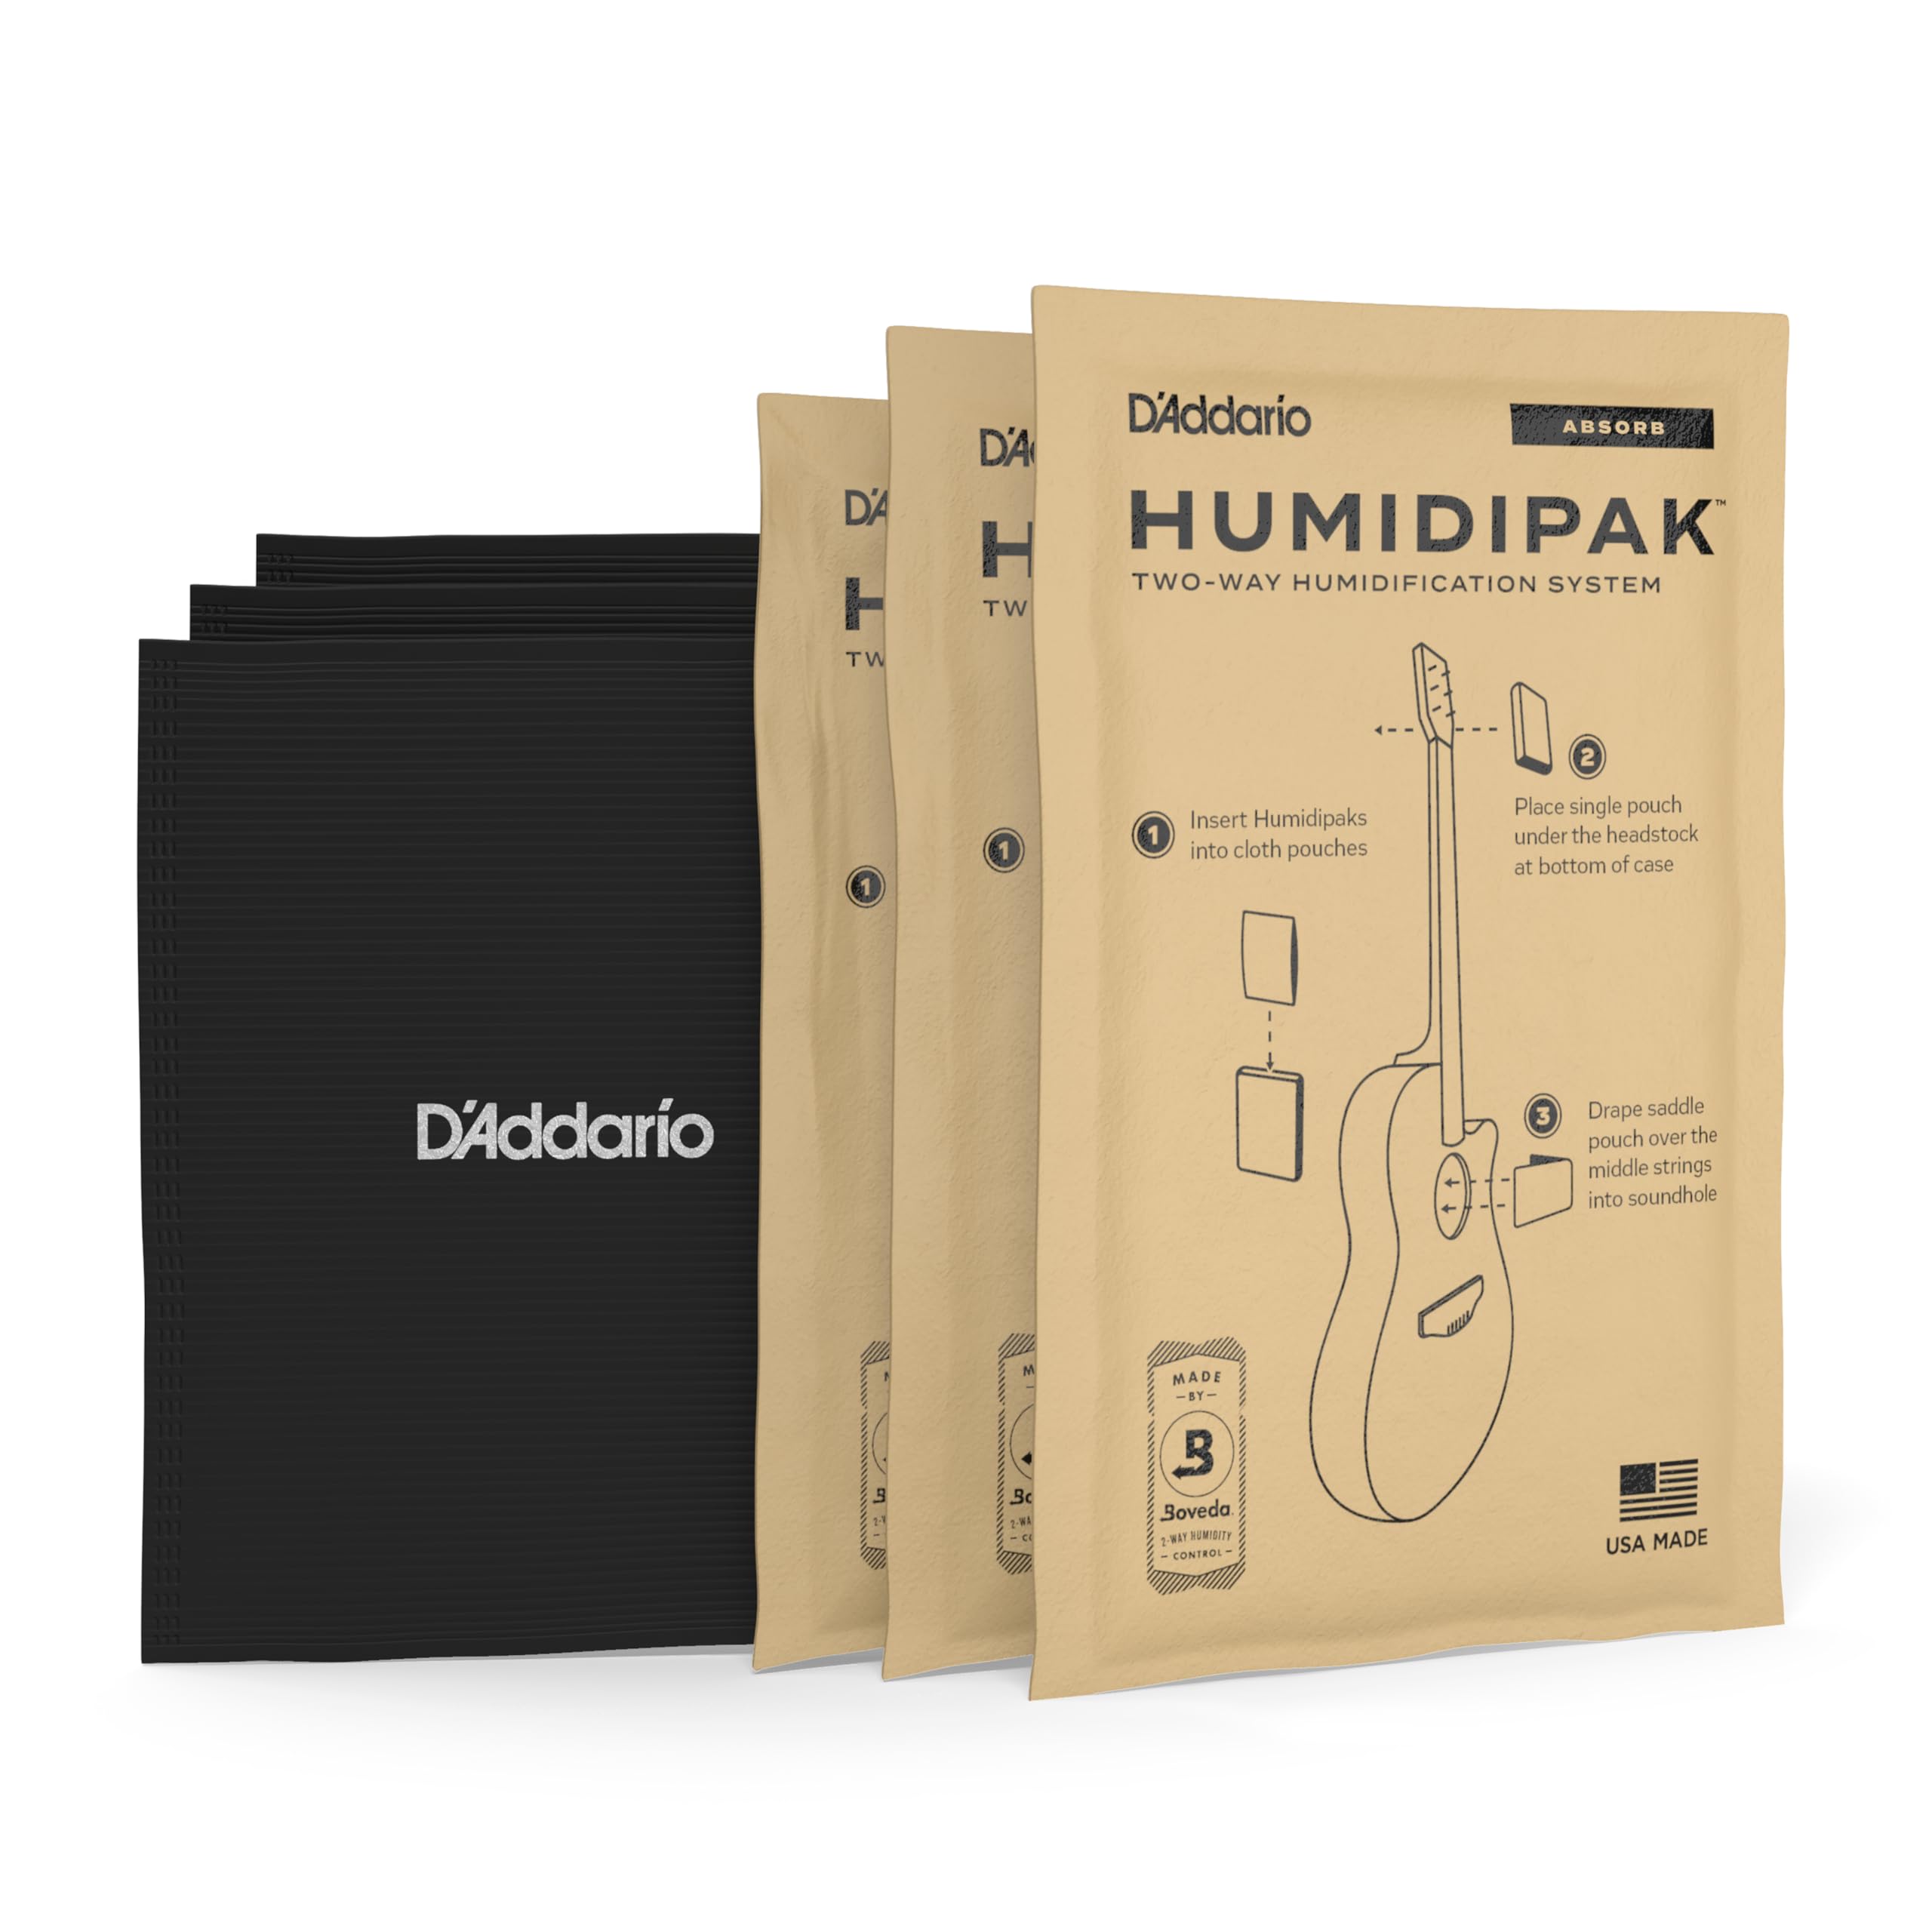 D'Addario Guitar Dehumidifier System - Humidipak Absorb Kit - Automatic Humidity Control System - Maintenance-Free, Two-Way Humidity Control System For Guitars